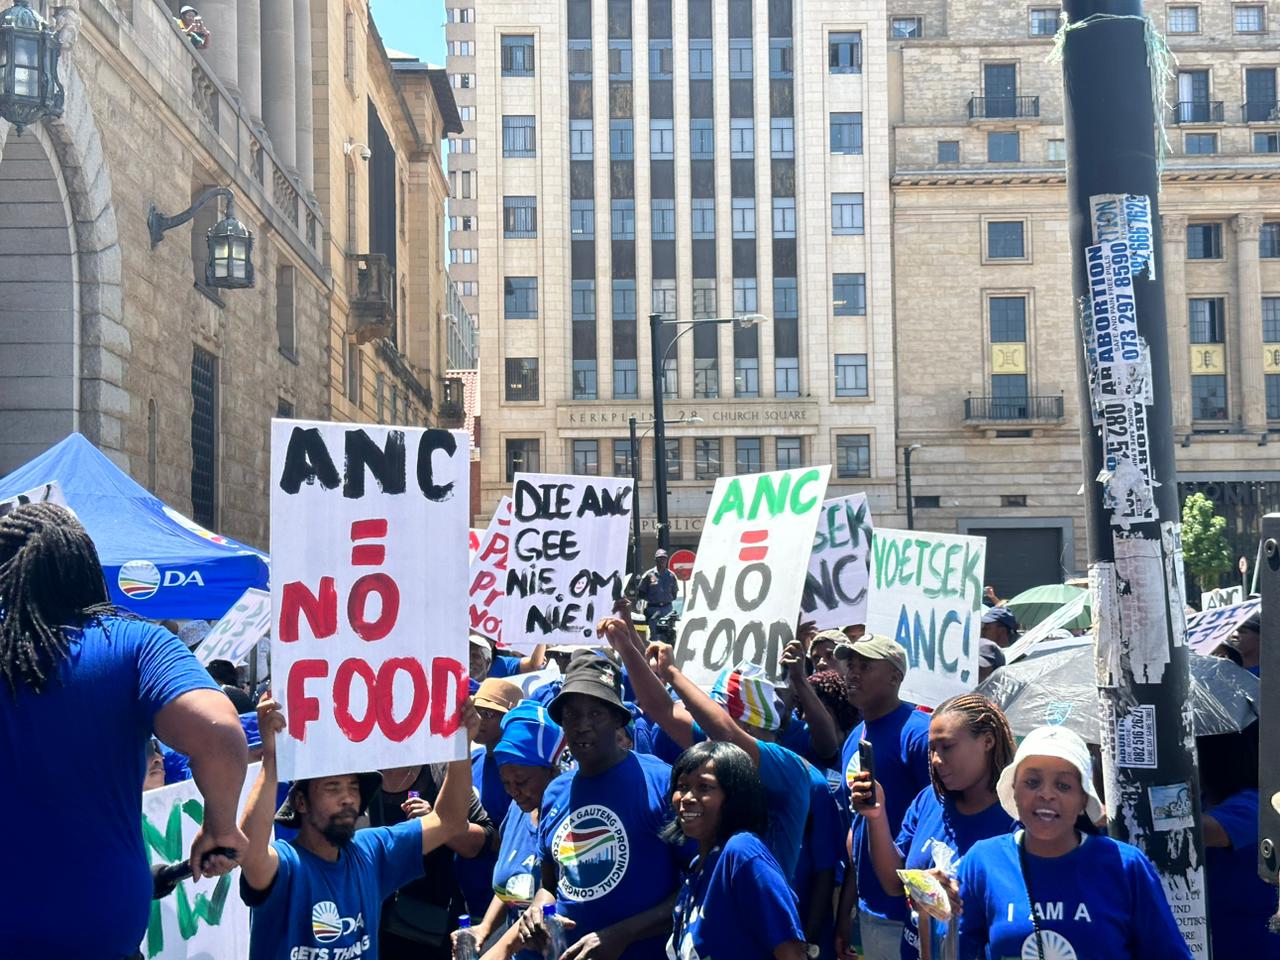 DA members outside the office of the Minister of finance in Pretoria demand zero vat on food